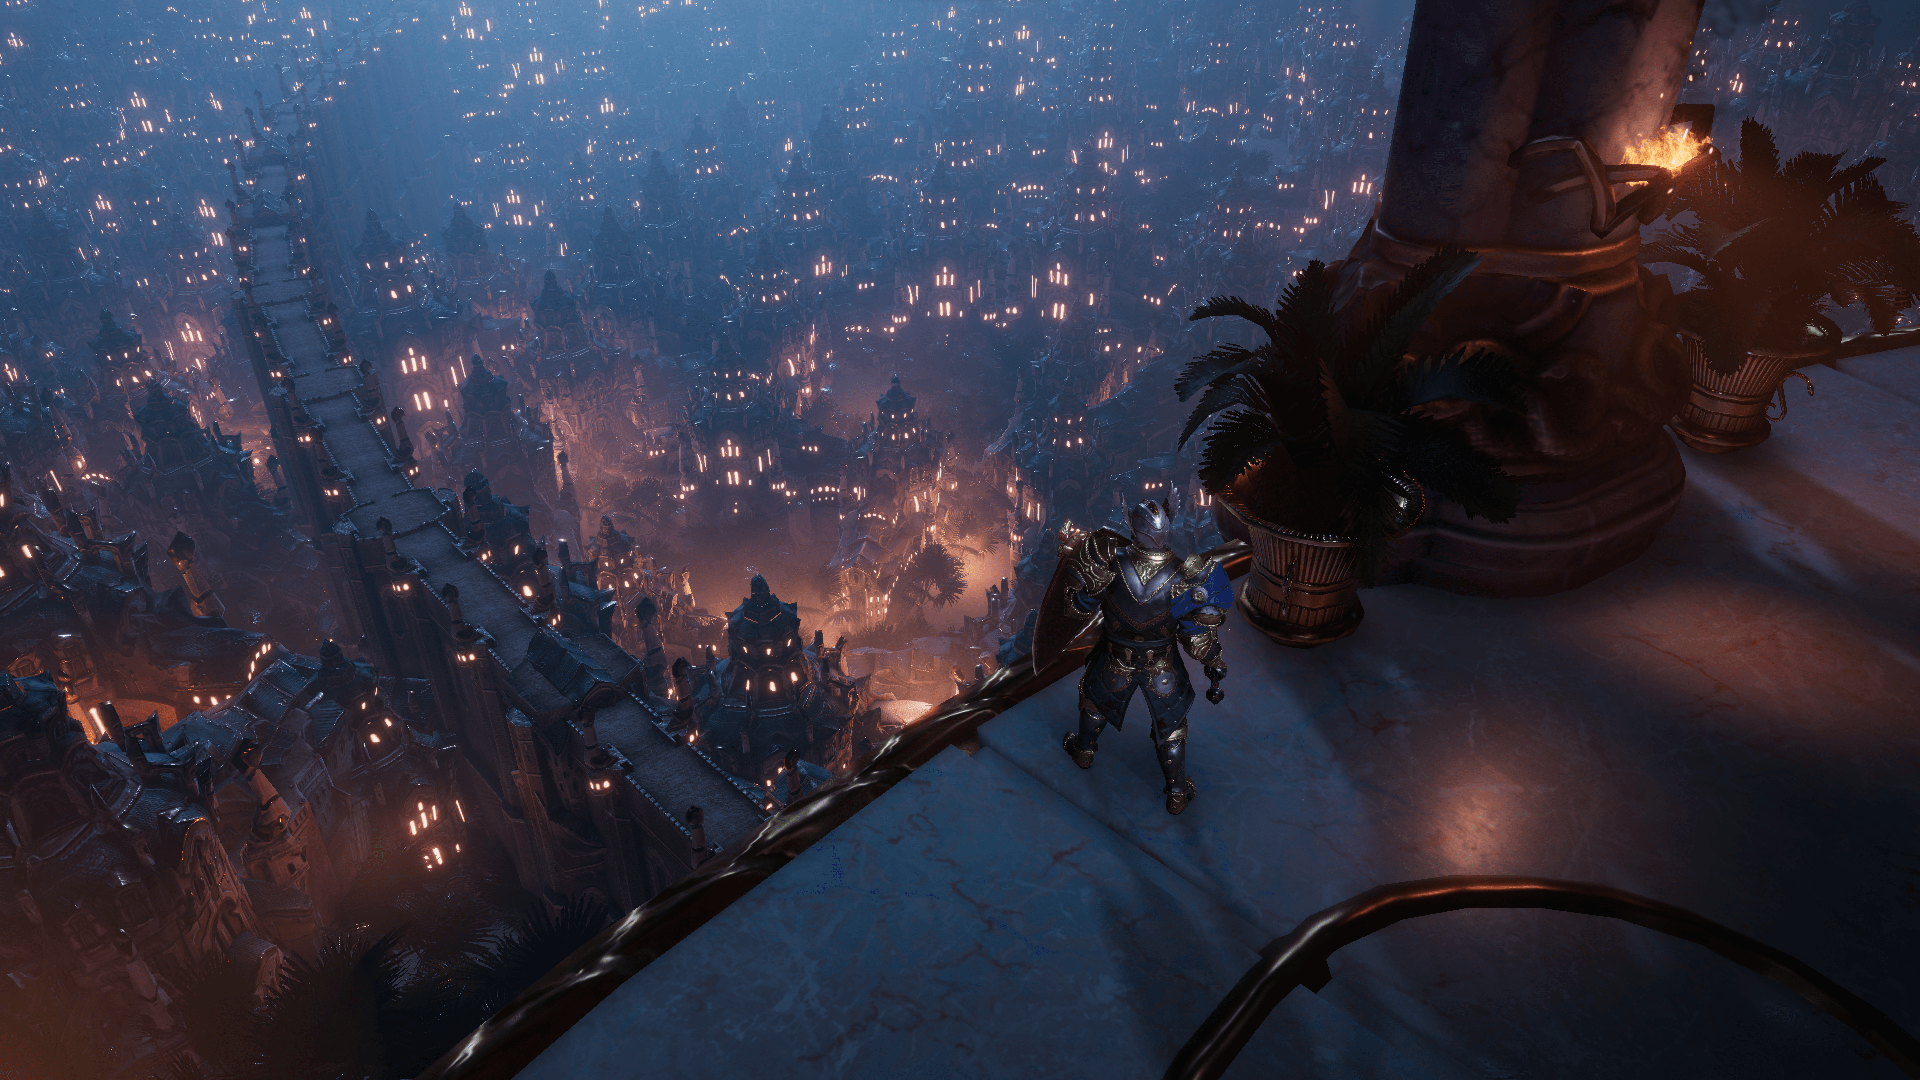 A screenshot of Last Epoch, showing a knight overlooking a light-up city